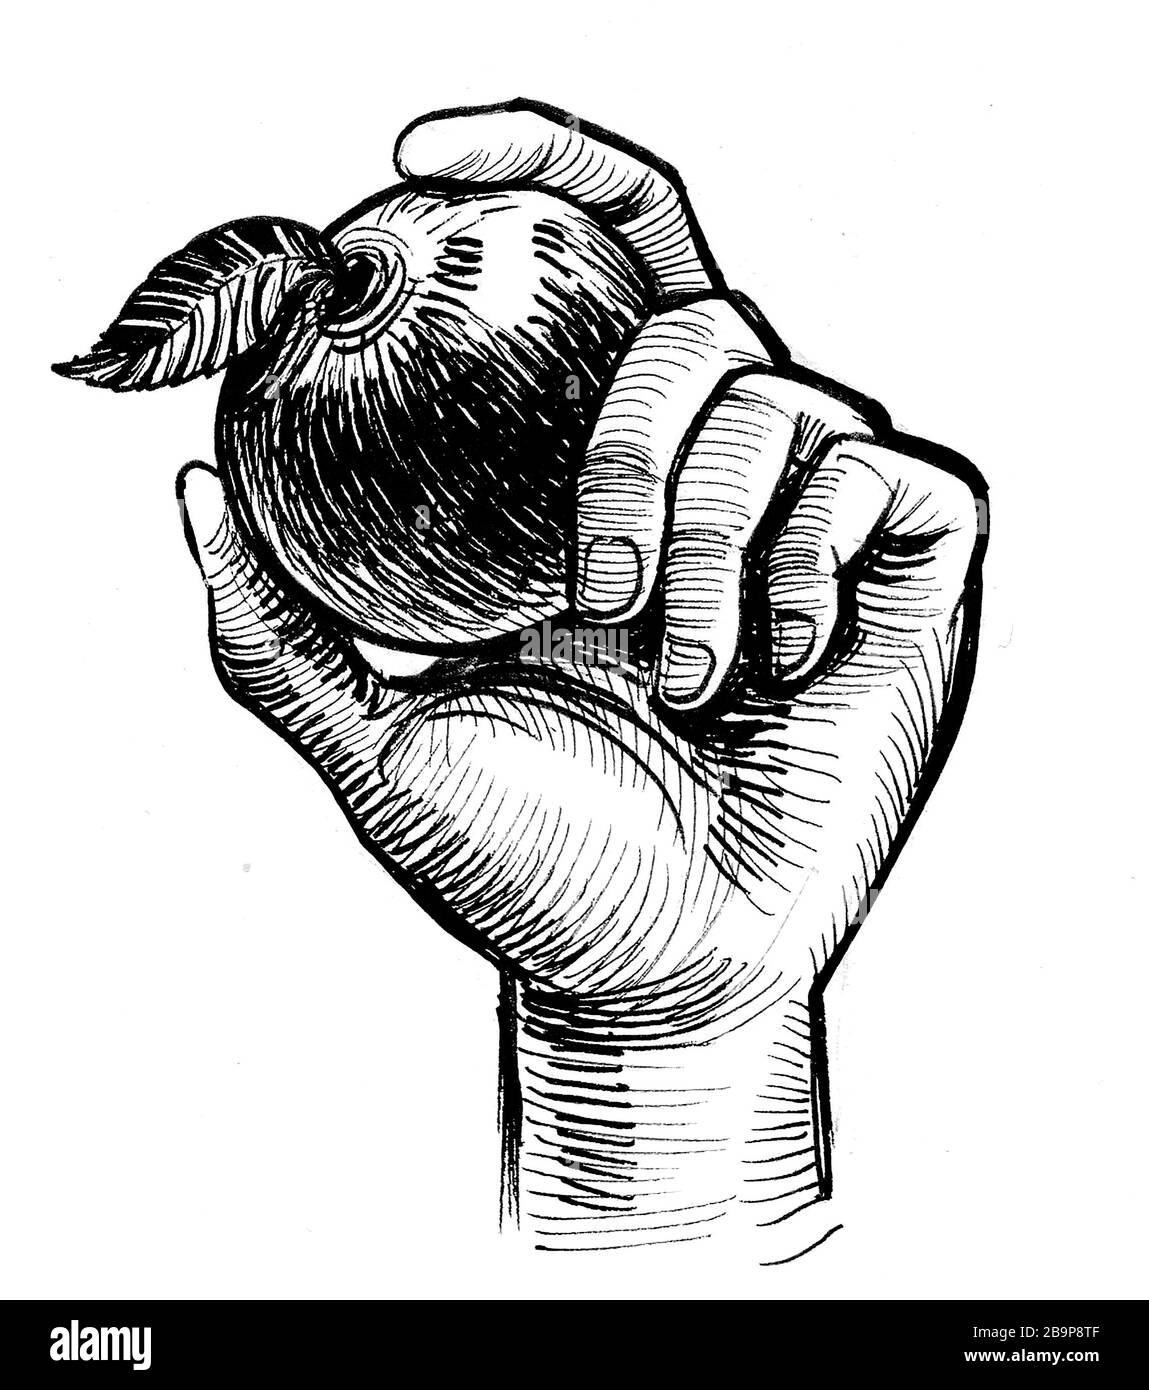 Hand holding apple fruit. Ink black and white drawing Stock Photo